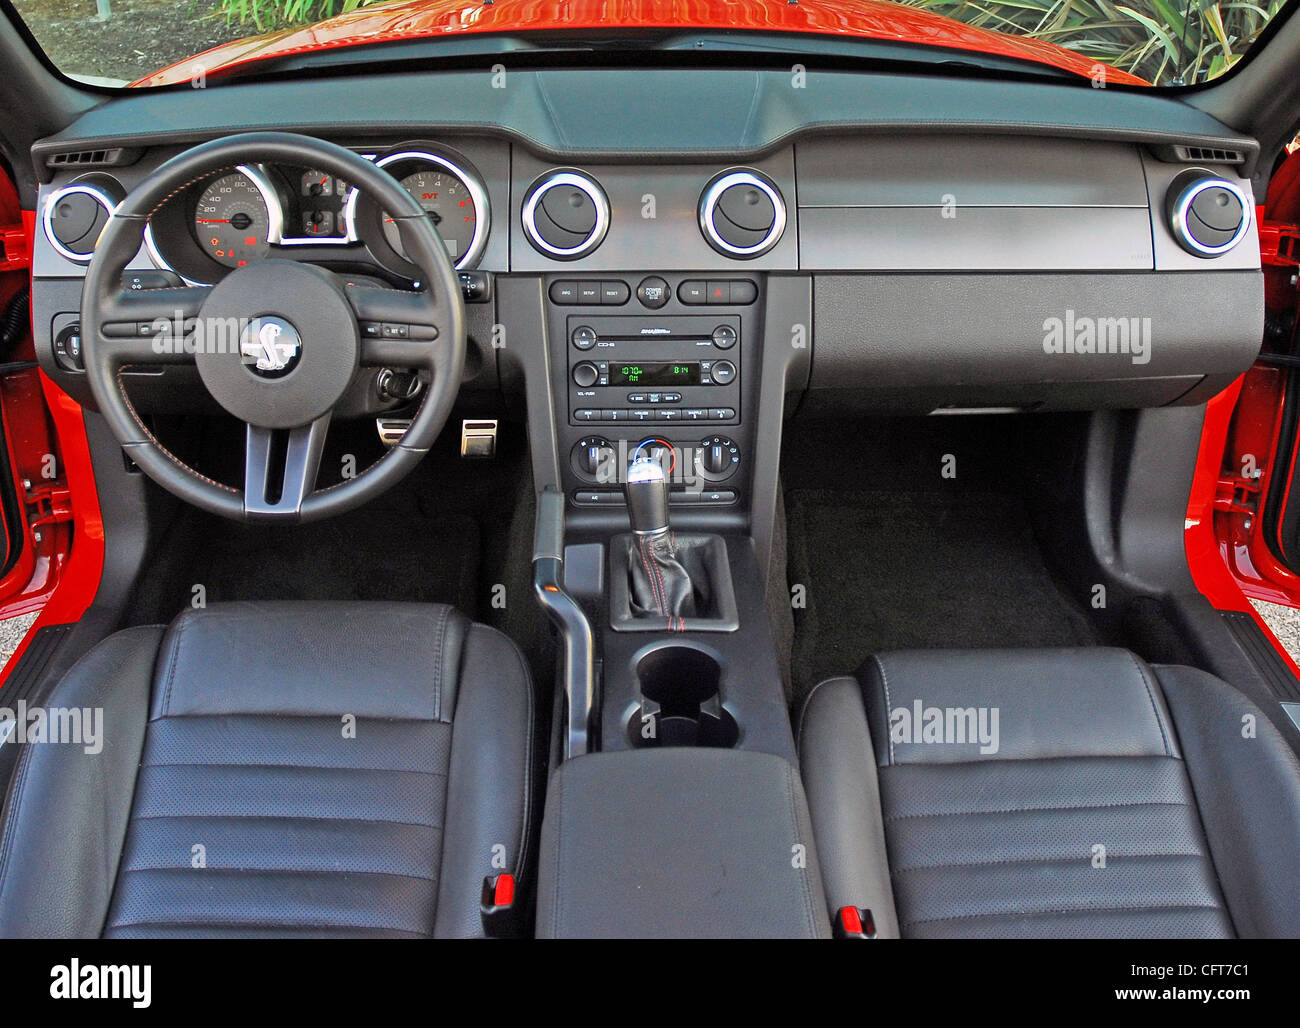 2007 Ford Shelby GT500 Mustang dashboard Stock Photo